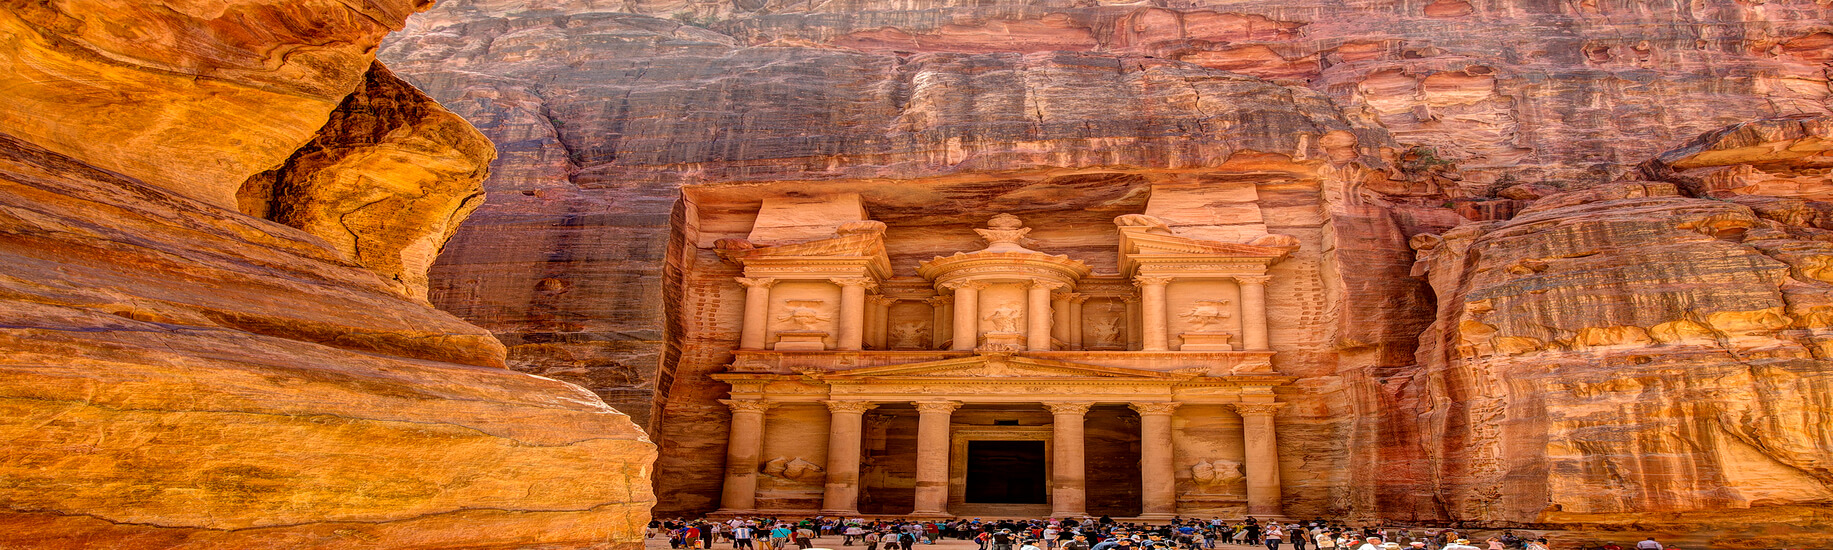 From Eilat: 2 Day Petra Tour With Overnight in Petra $250 